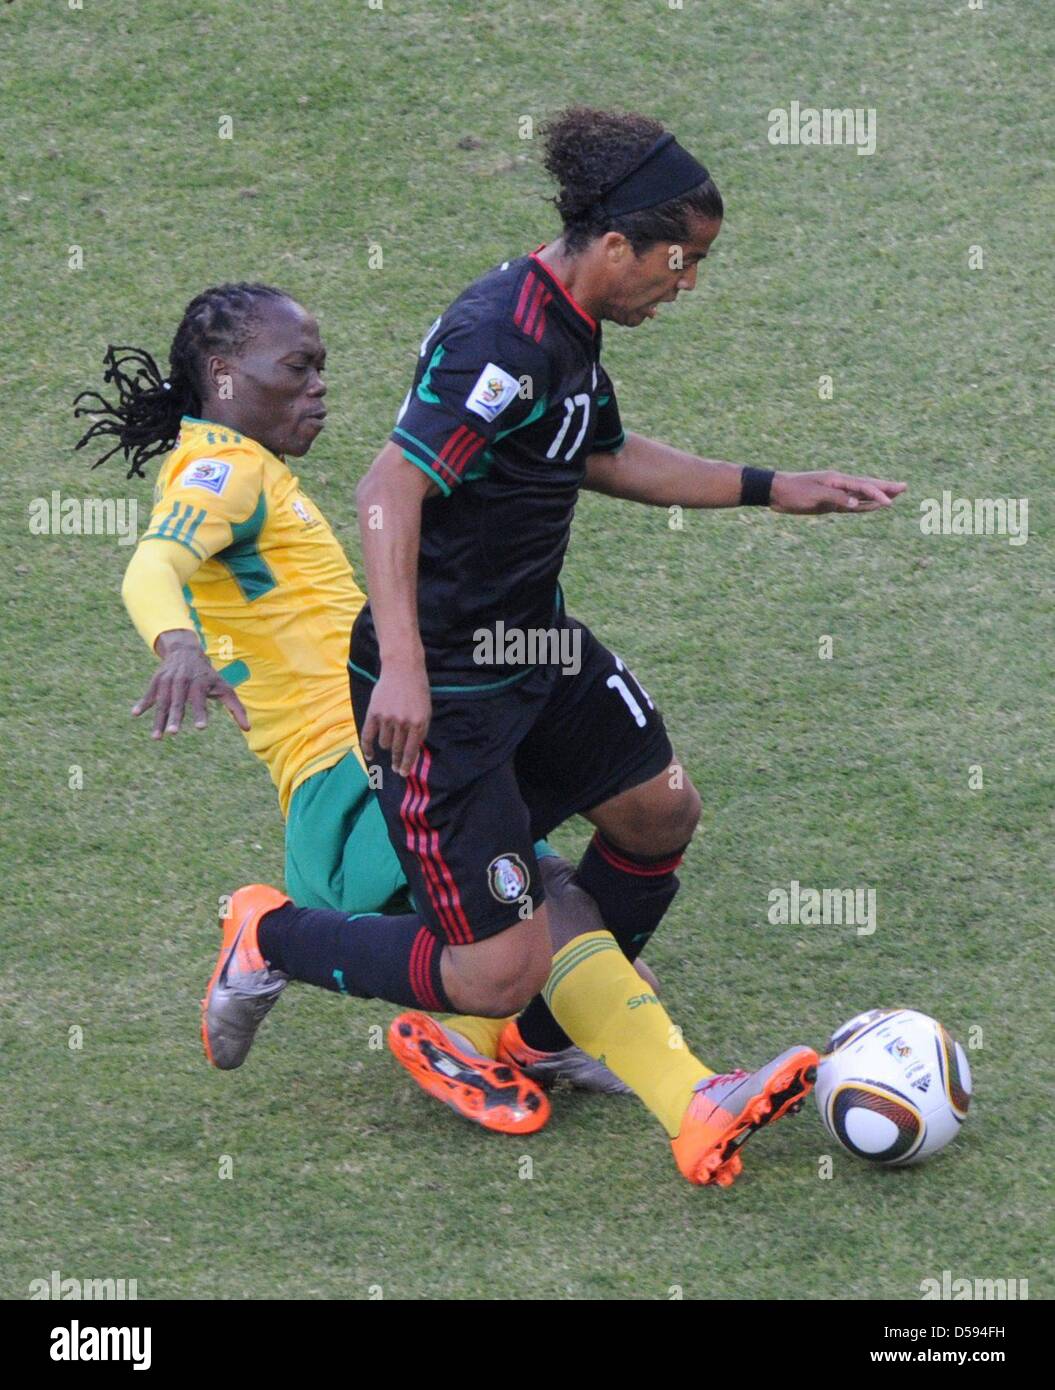 Mexico's Giovani dos Santos (R) and South Africa's Reneilwe Letsholonyane (L) vie for the ball during the opening match between South Africa and Mexico of the 2010 FIFA World Cup at Soccer City stadium in Johannesburg, South Africa 11 June 2010. Photo: Marcus Brandt dpa - Please refer to http://dpaq.de/FIFA-WM2010-TC Stock Photo